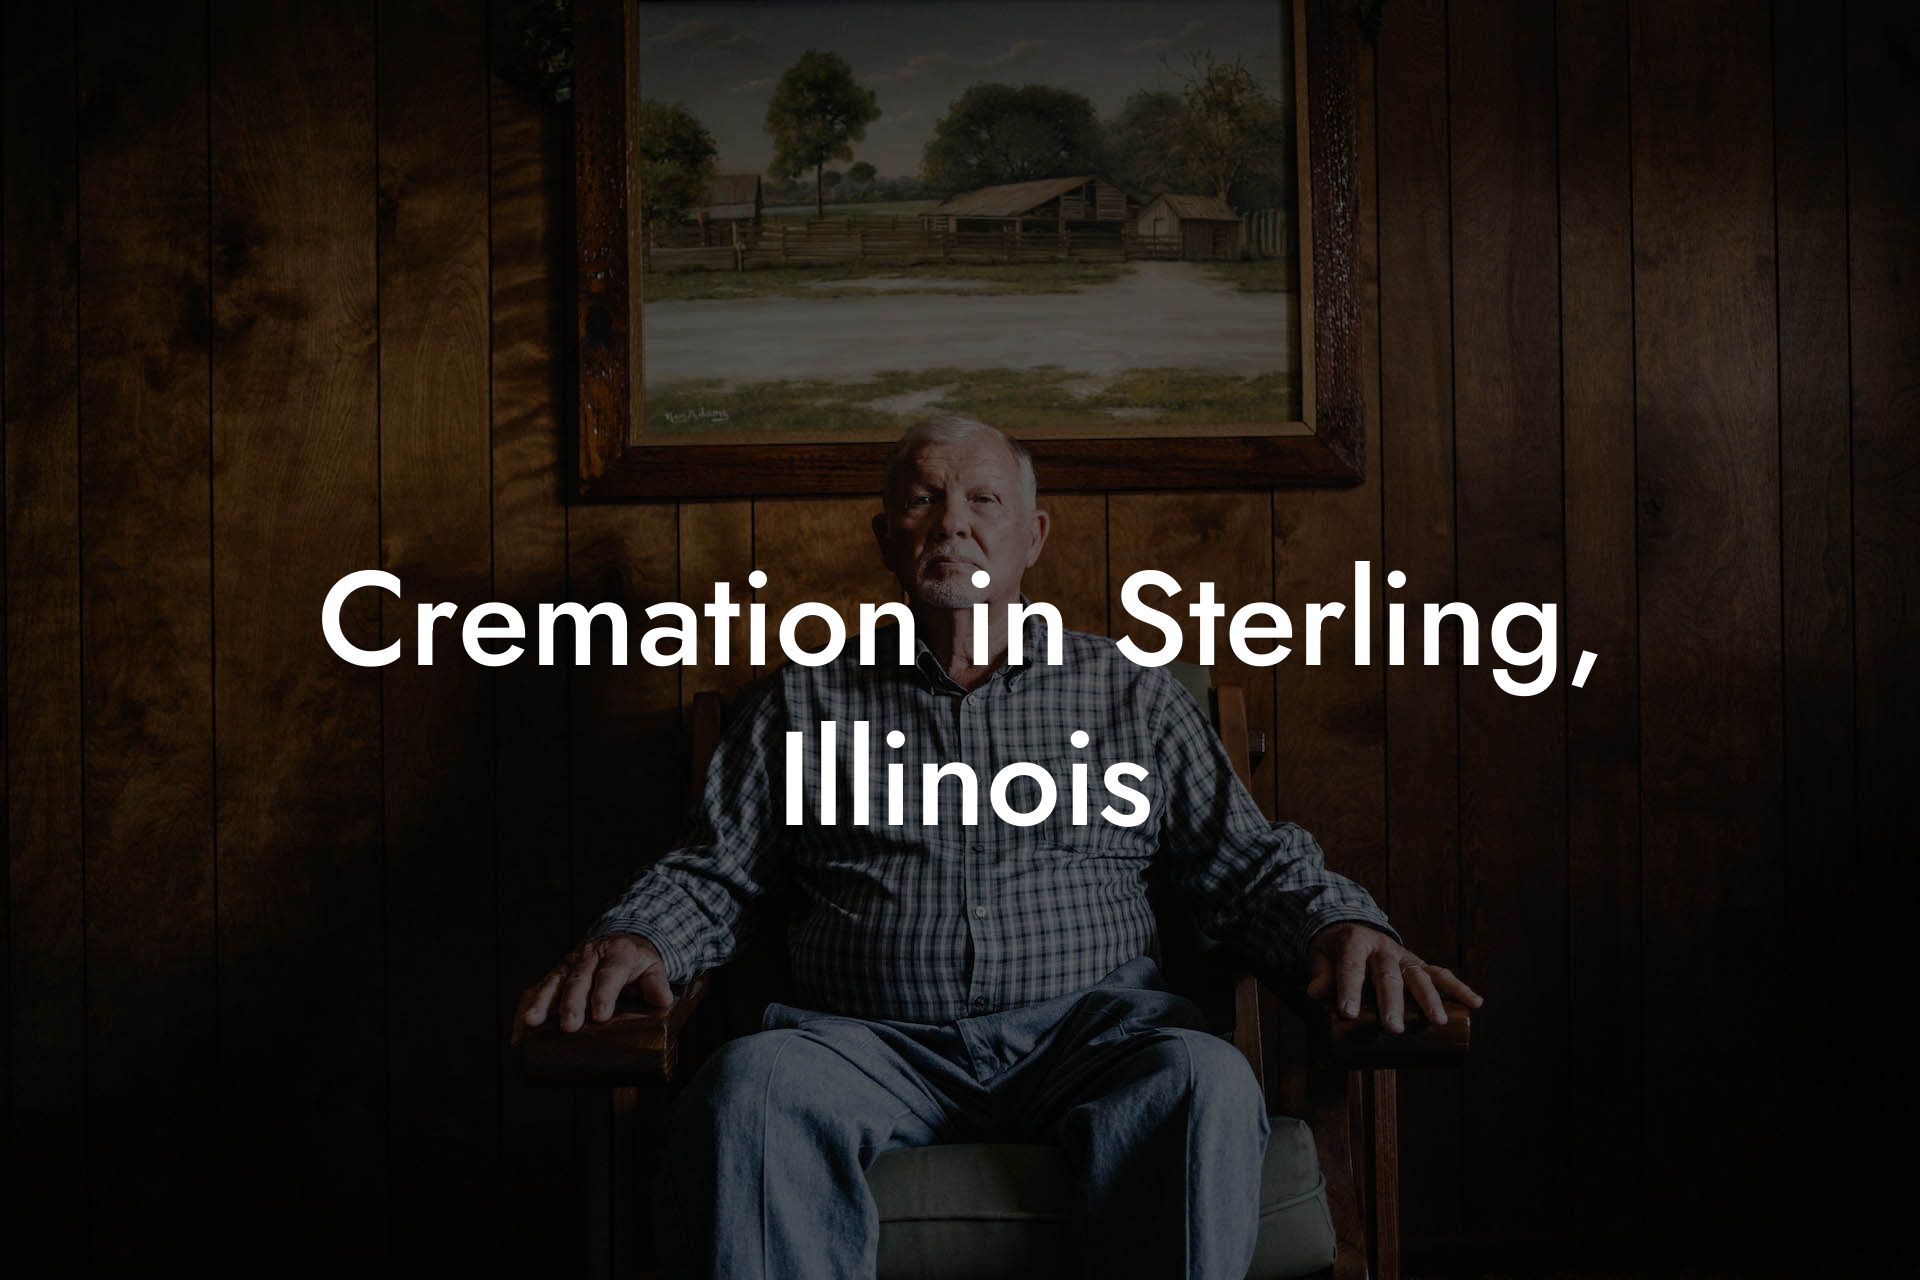 Cremation in Sterling, Illinois